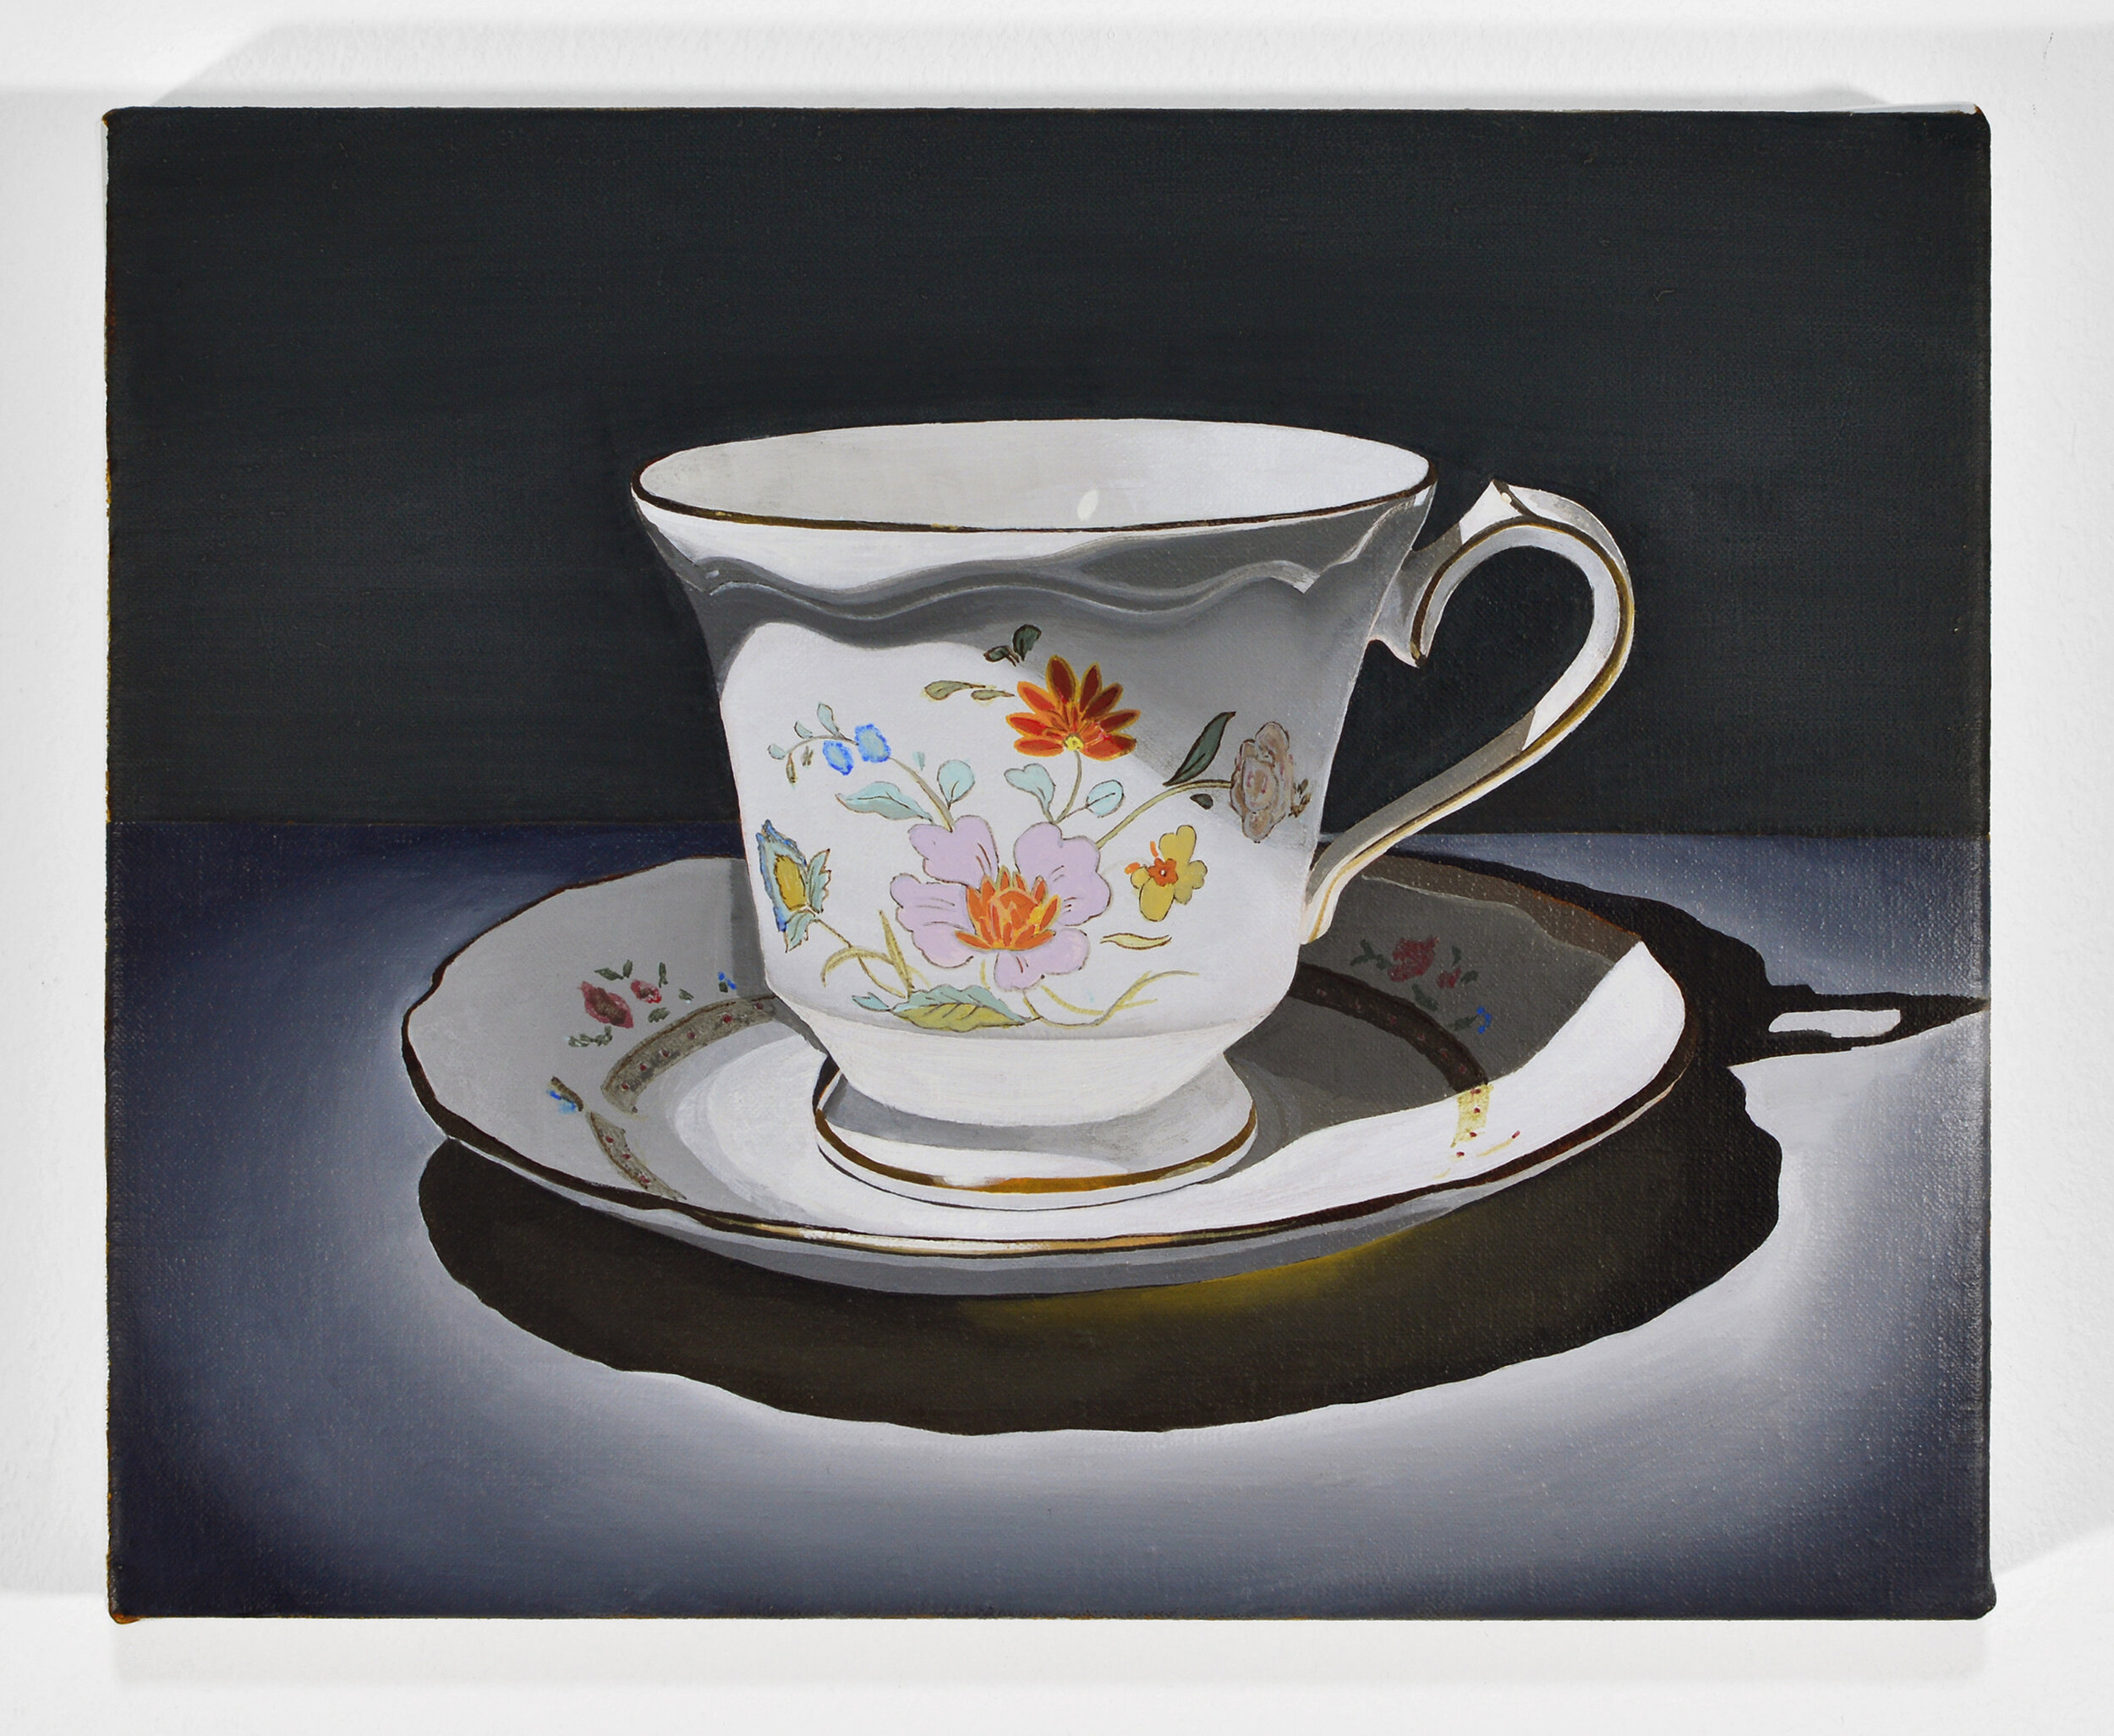  Teacup and saucer (b) (2019)  Oil on linen  20 x 25cm  Private Collection 